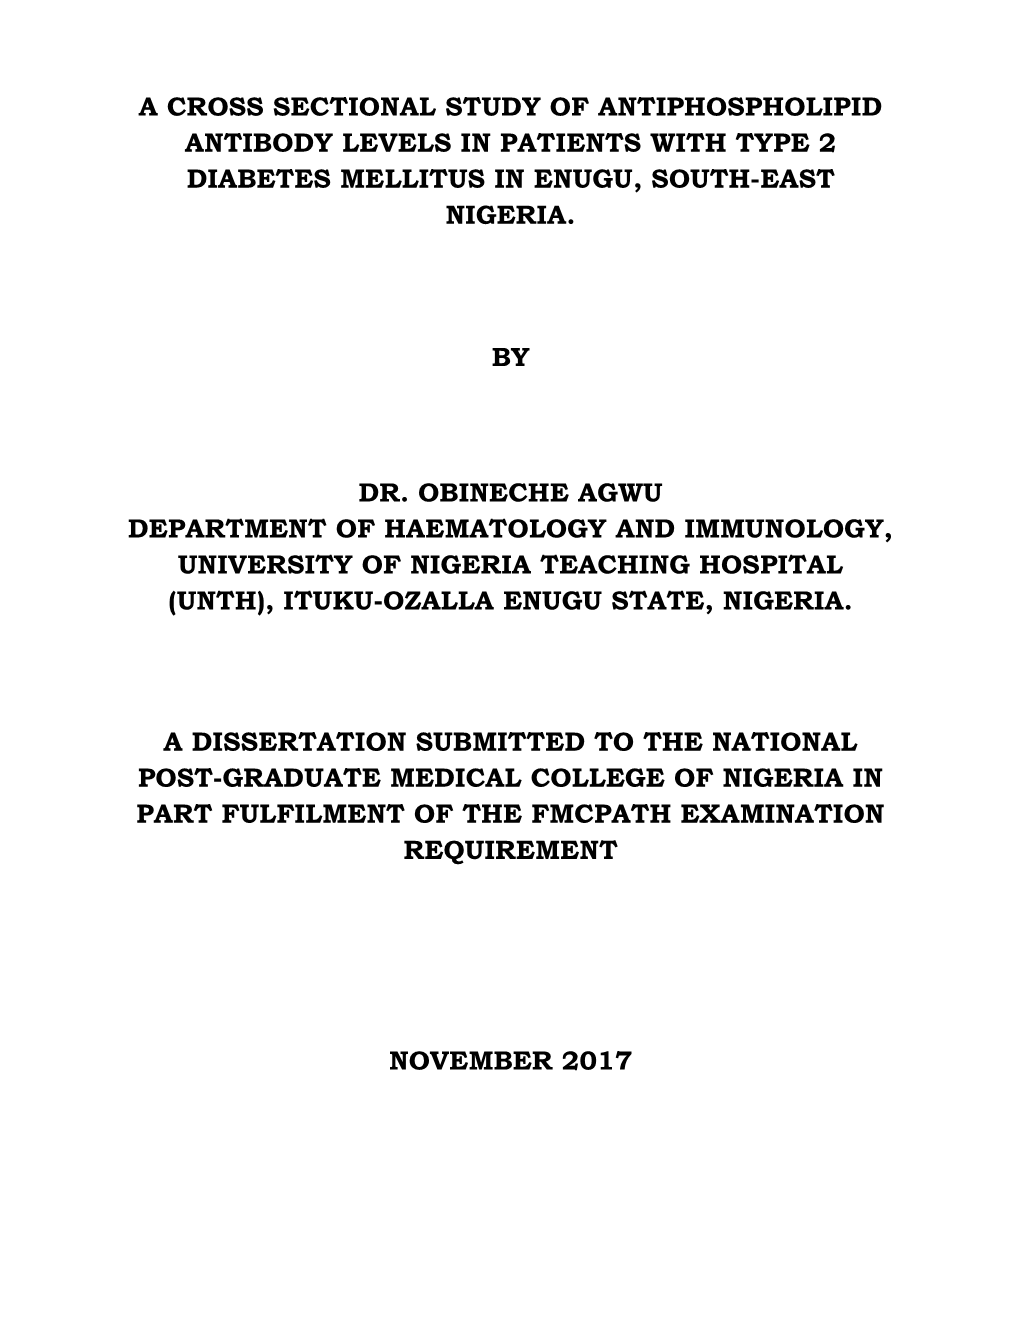 A Cross Sectional Study of Antiphospholipid Antibody Levels in Patients with Type 2 Diabetes Mellitus in Enugu, South-East Nigeria